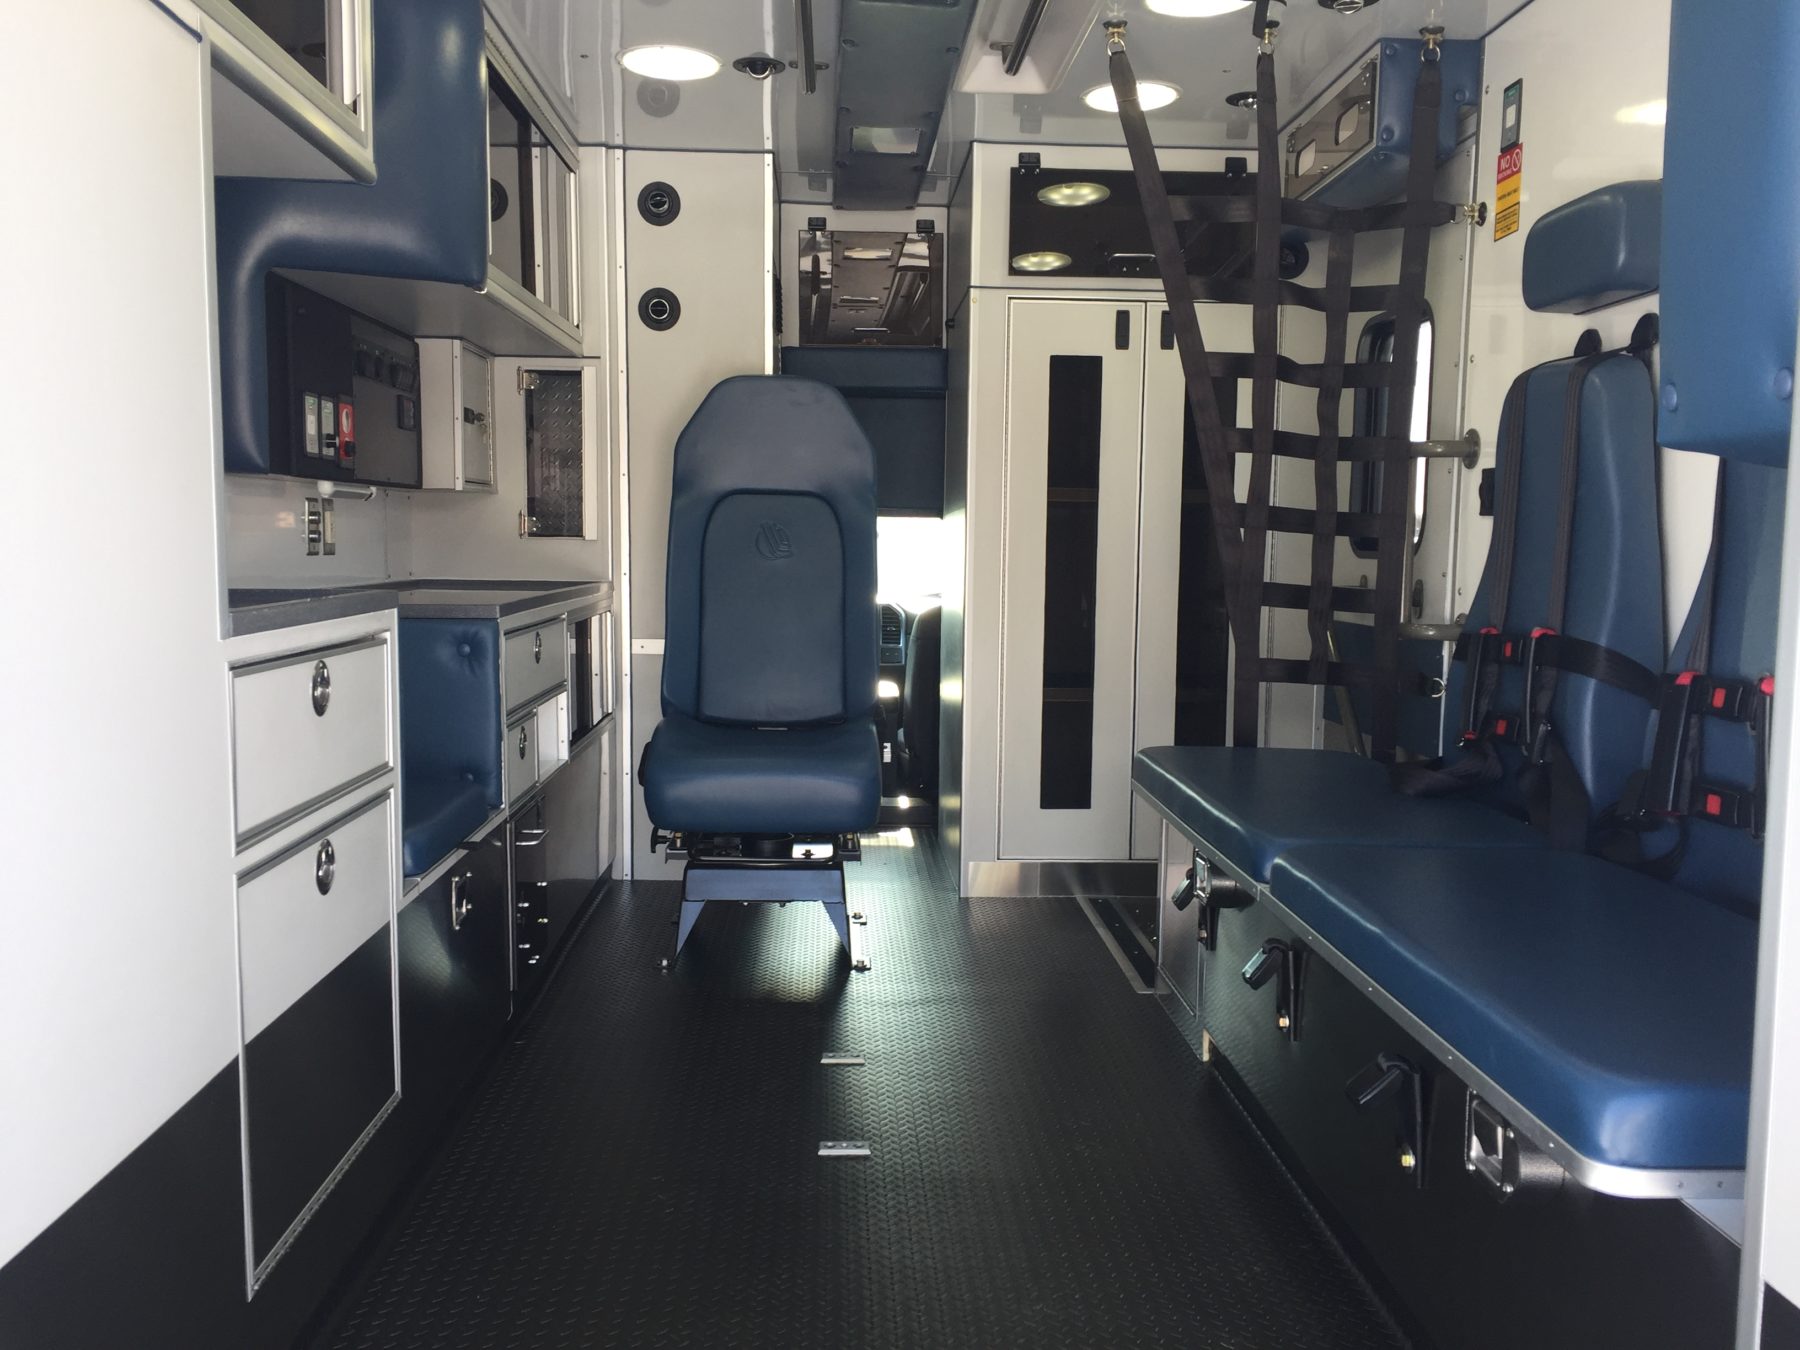 2019 Ford F450 4x4 Heavy Duty Ambulance For Sale – Picture 2